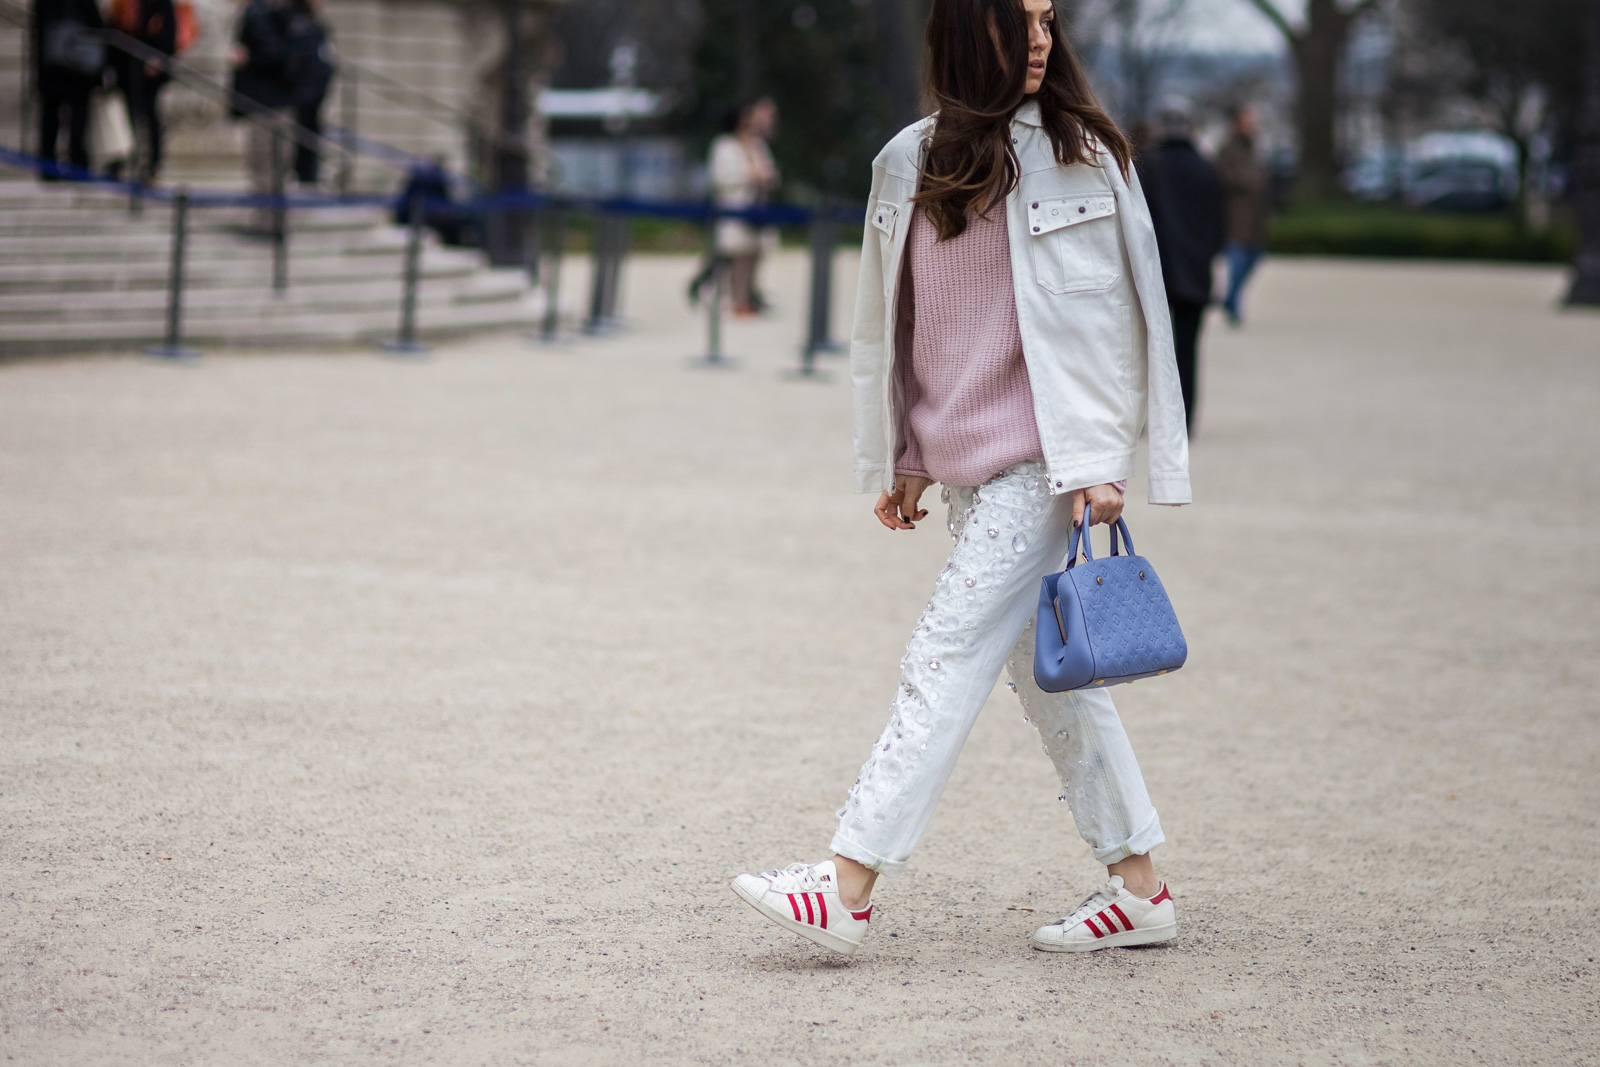 Erika Boldrin wearing Dondup embellished jeans, pink sweater, white denim jacket, Louis Vuitton bag and Adidas sneakers before the Chanel Fall/Winter 2015-2016 fashion show in Paris, France